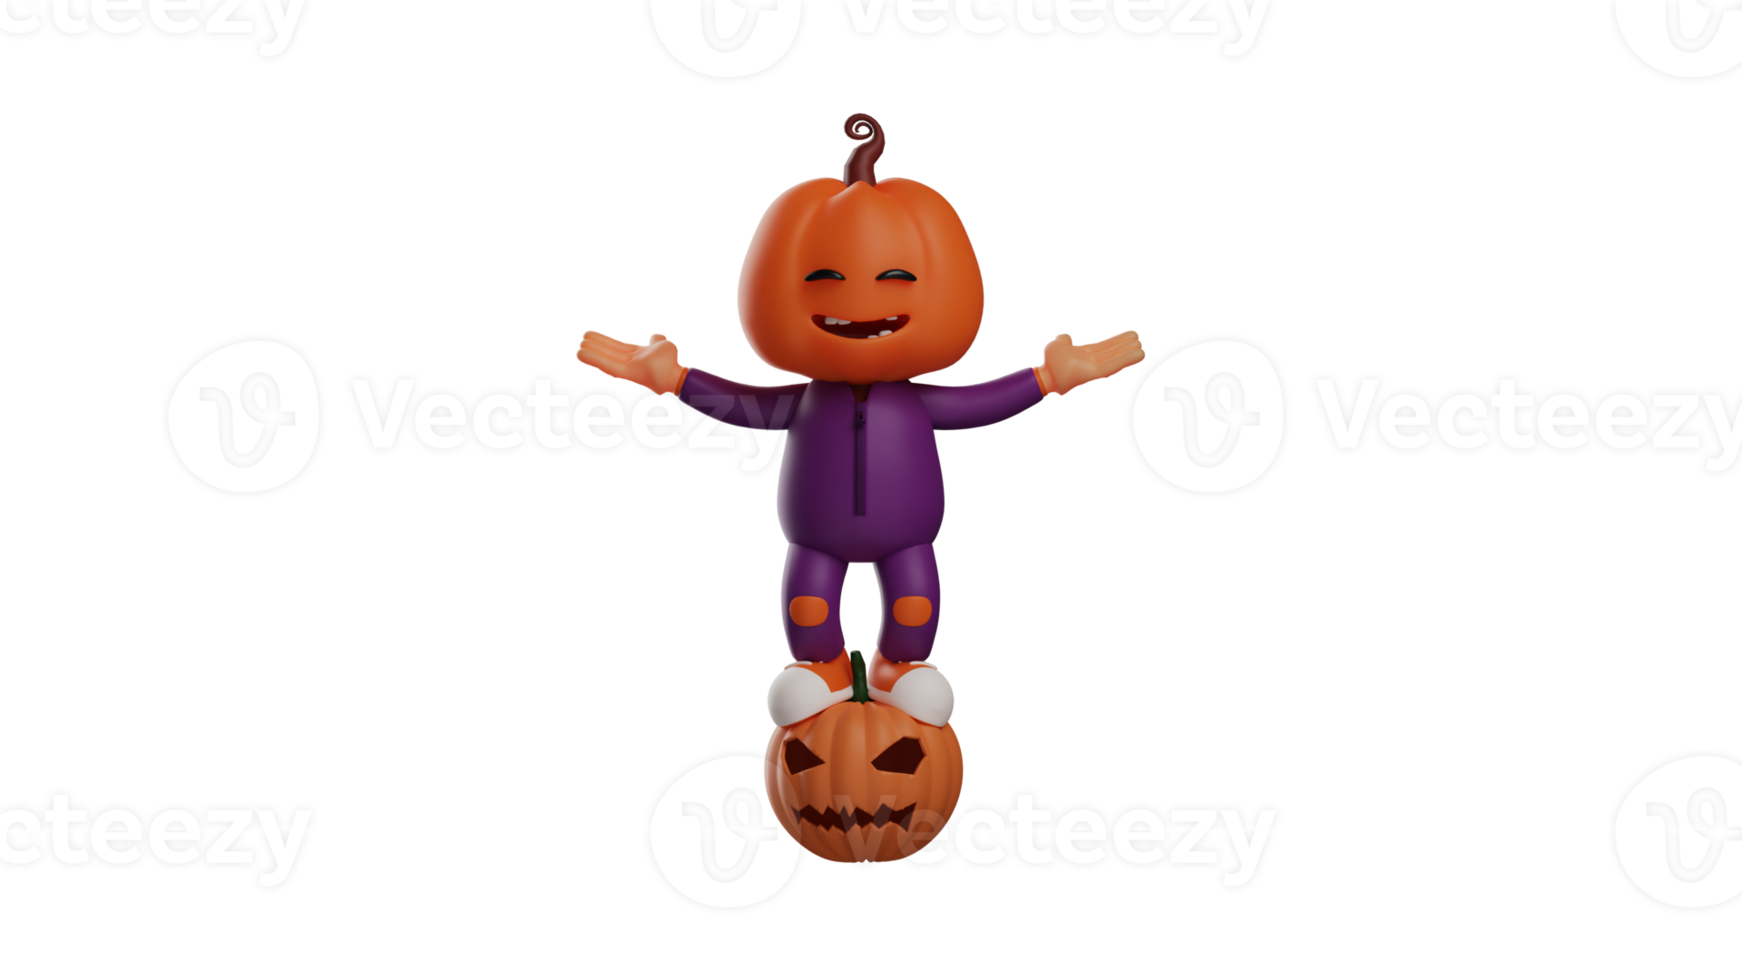 3D illustration. Cheerful Halloween 3D Cartoon Character. Halloween scarecrow standing on a pumpkin and spreading his arms outstretched. Halloween cartoon smiling very happy. 3D cartoon character png